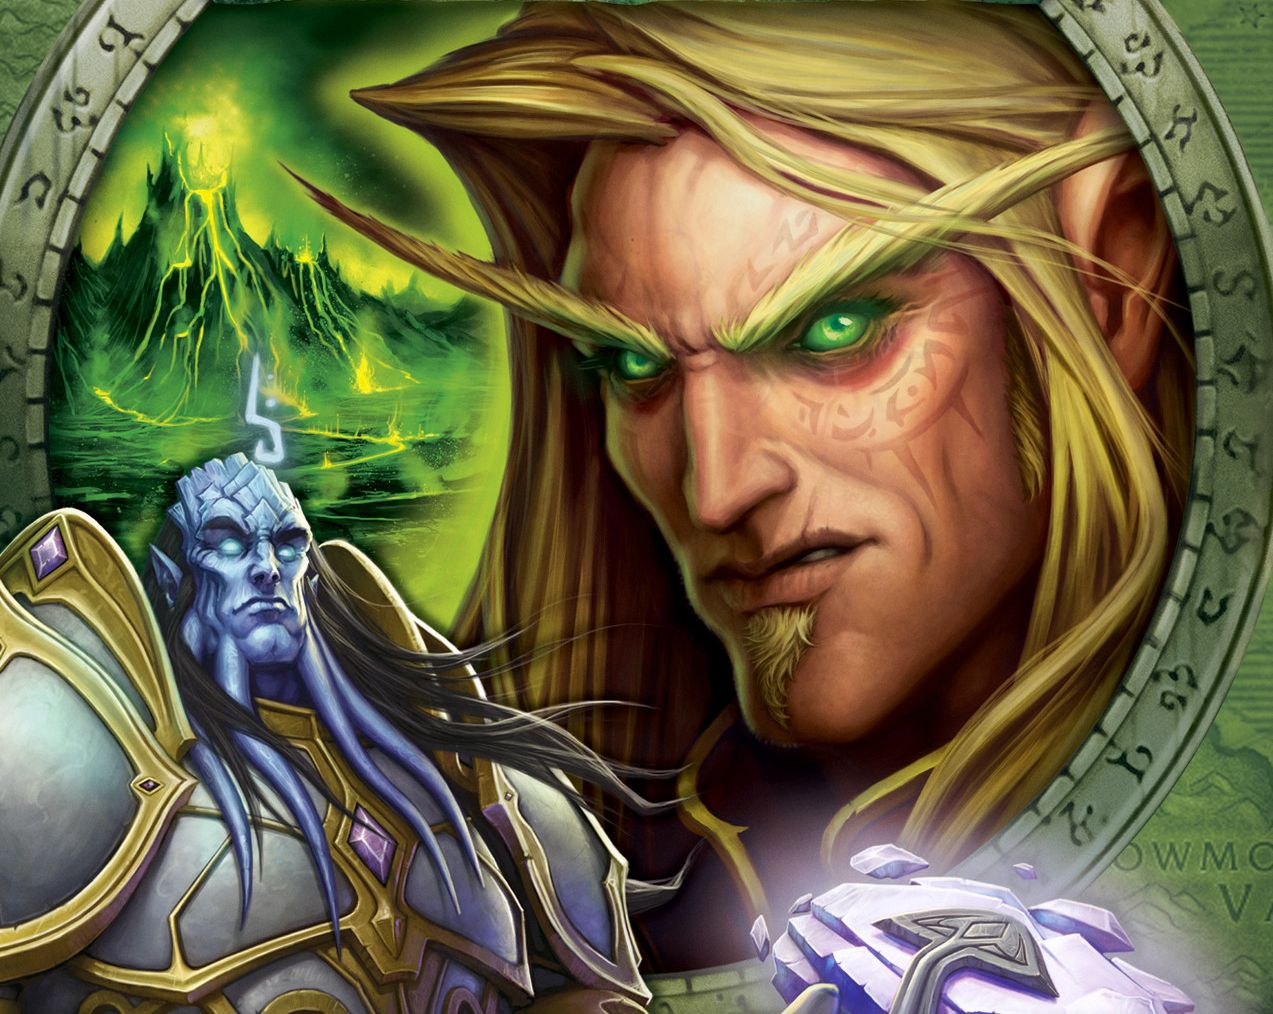 Image for World of Warcraft: Burning Crusade Classic release date set for June 1